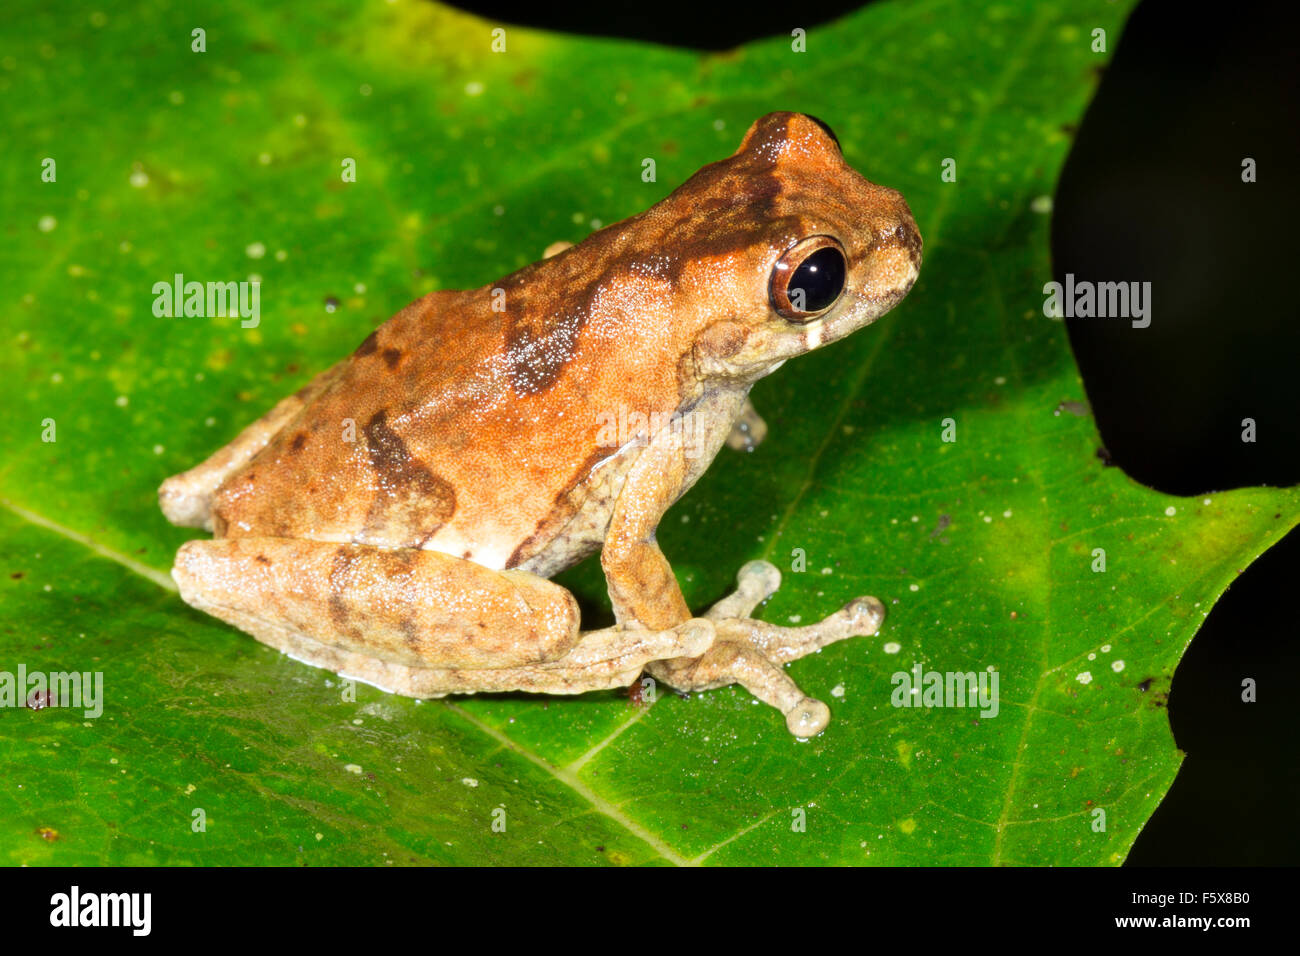 Short-headed Treefrog (Dendropsophus parviceps). A female distended with eggs on a leaf at the edge of a rainforest pond Stock Photo